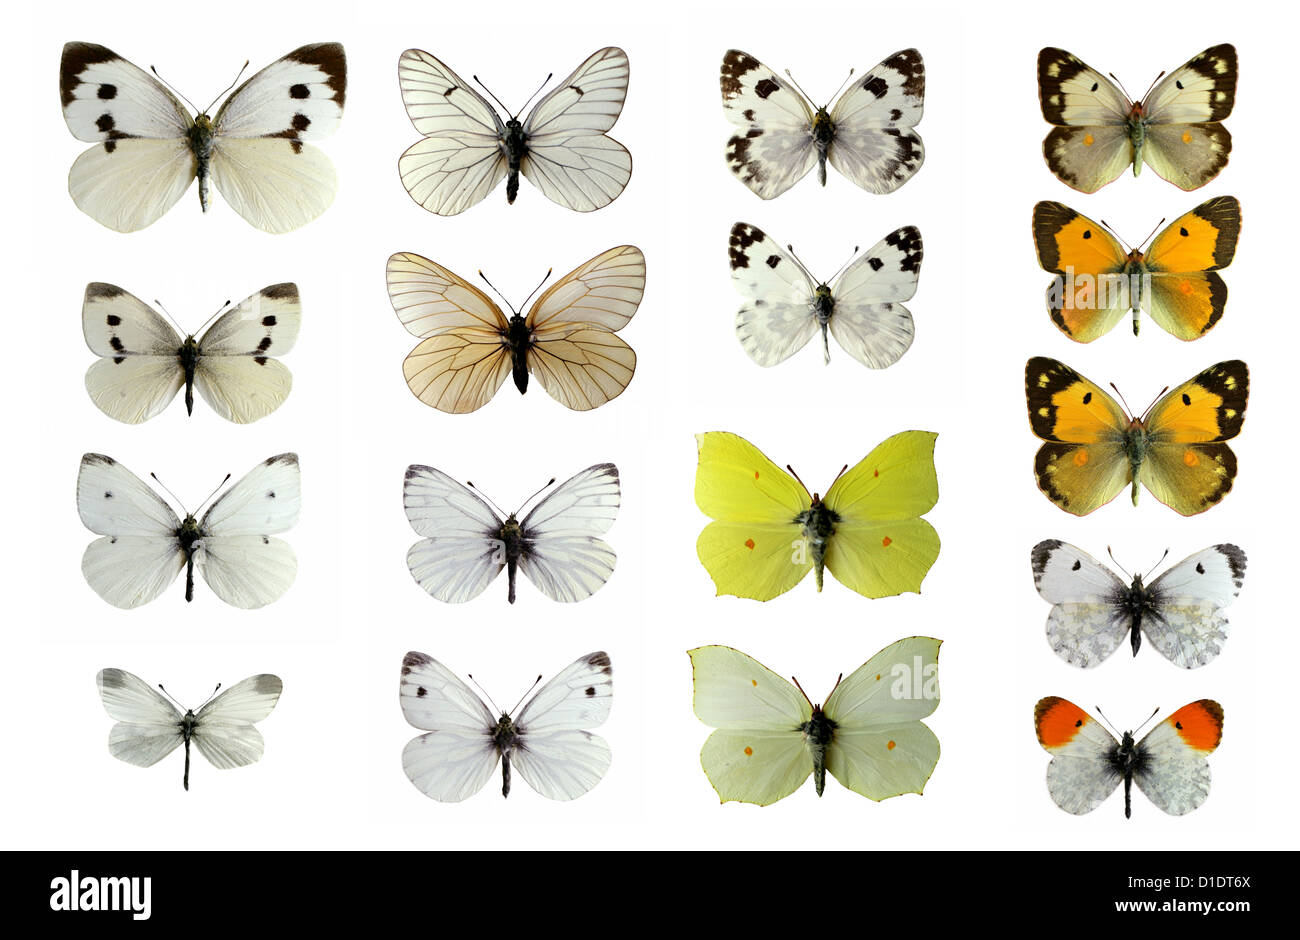 The UK Pieridae Butterfly Family, Lepidoptera. Mounted Specimens. Photo/Cutout. Stock Photo